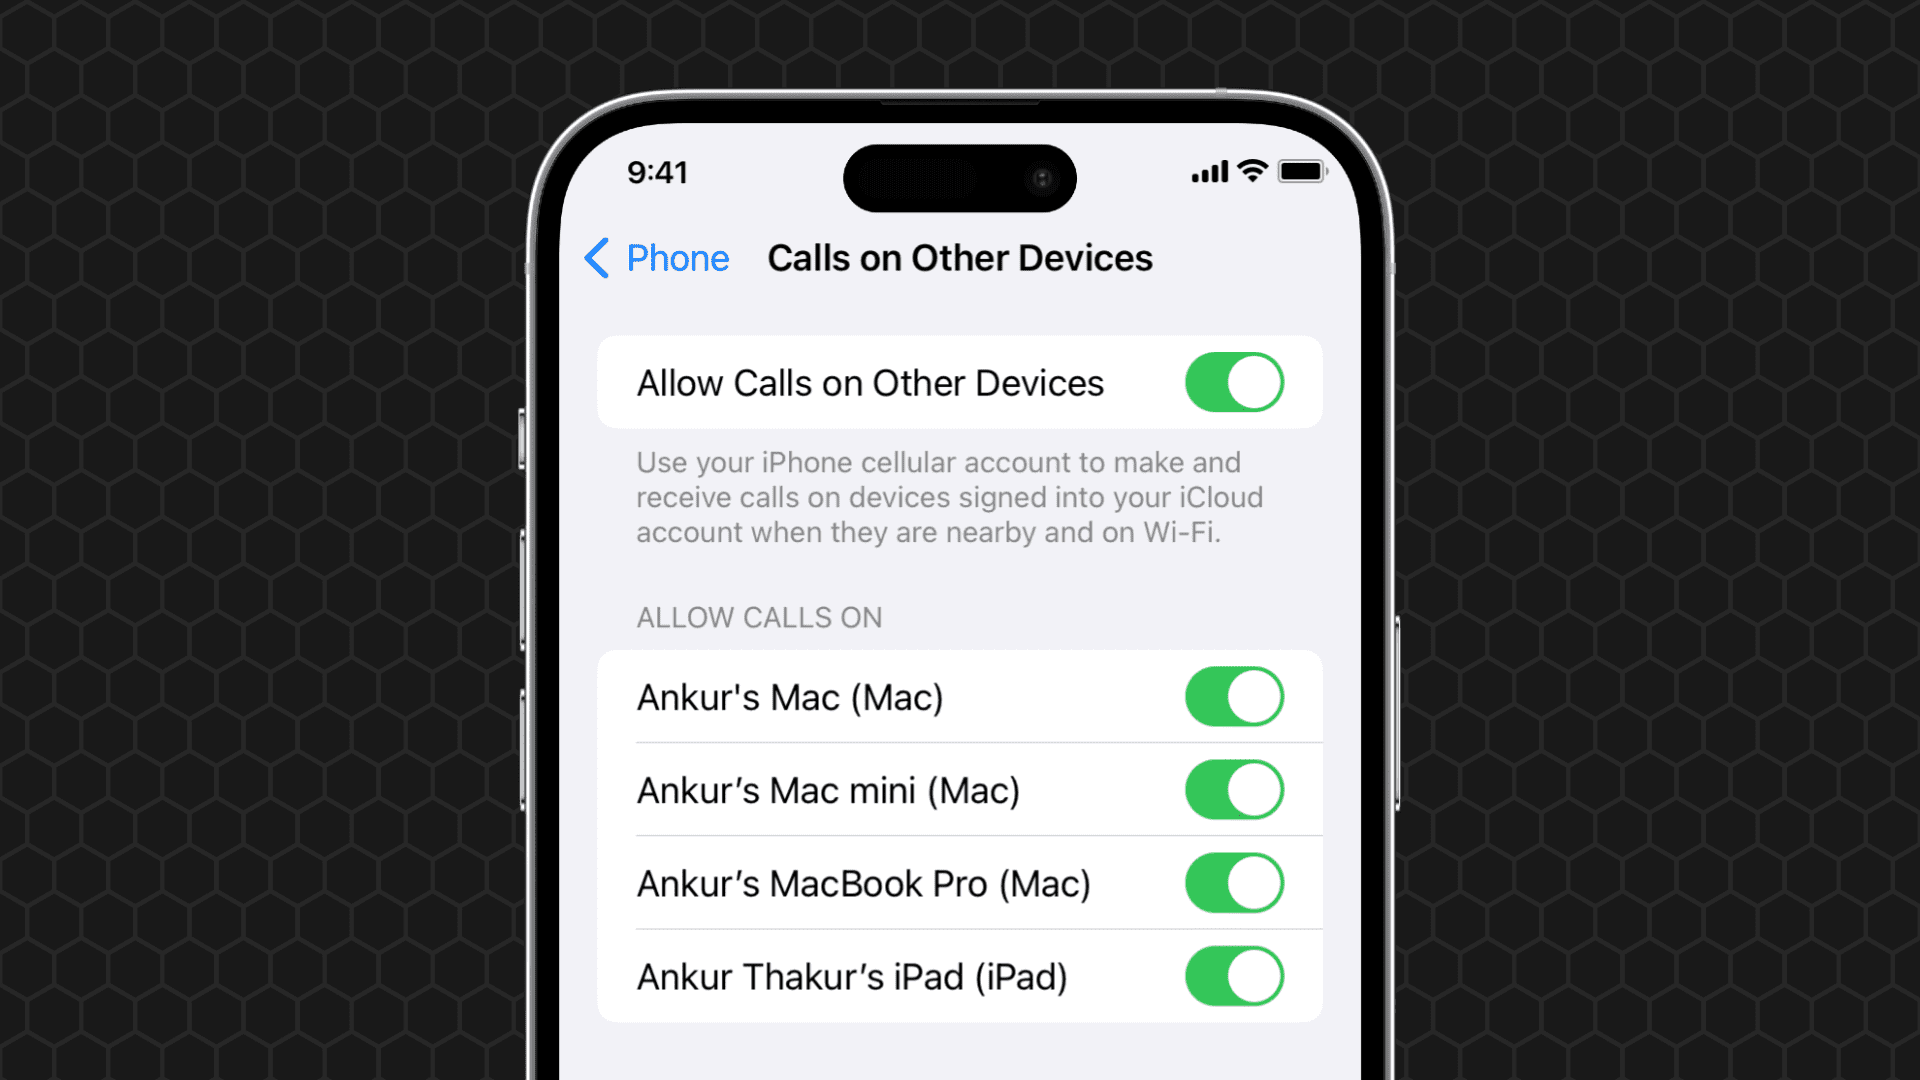 Allow Calls on Other Devices in iPhone settings